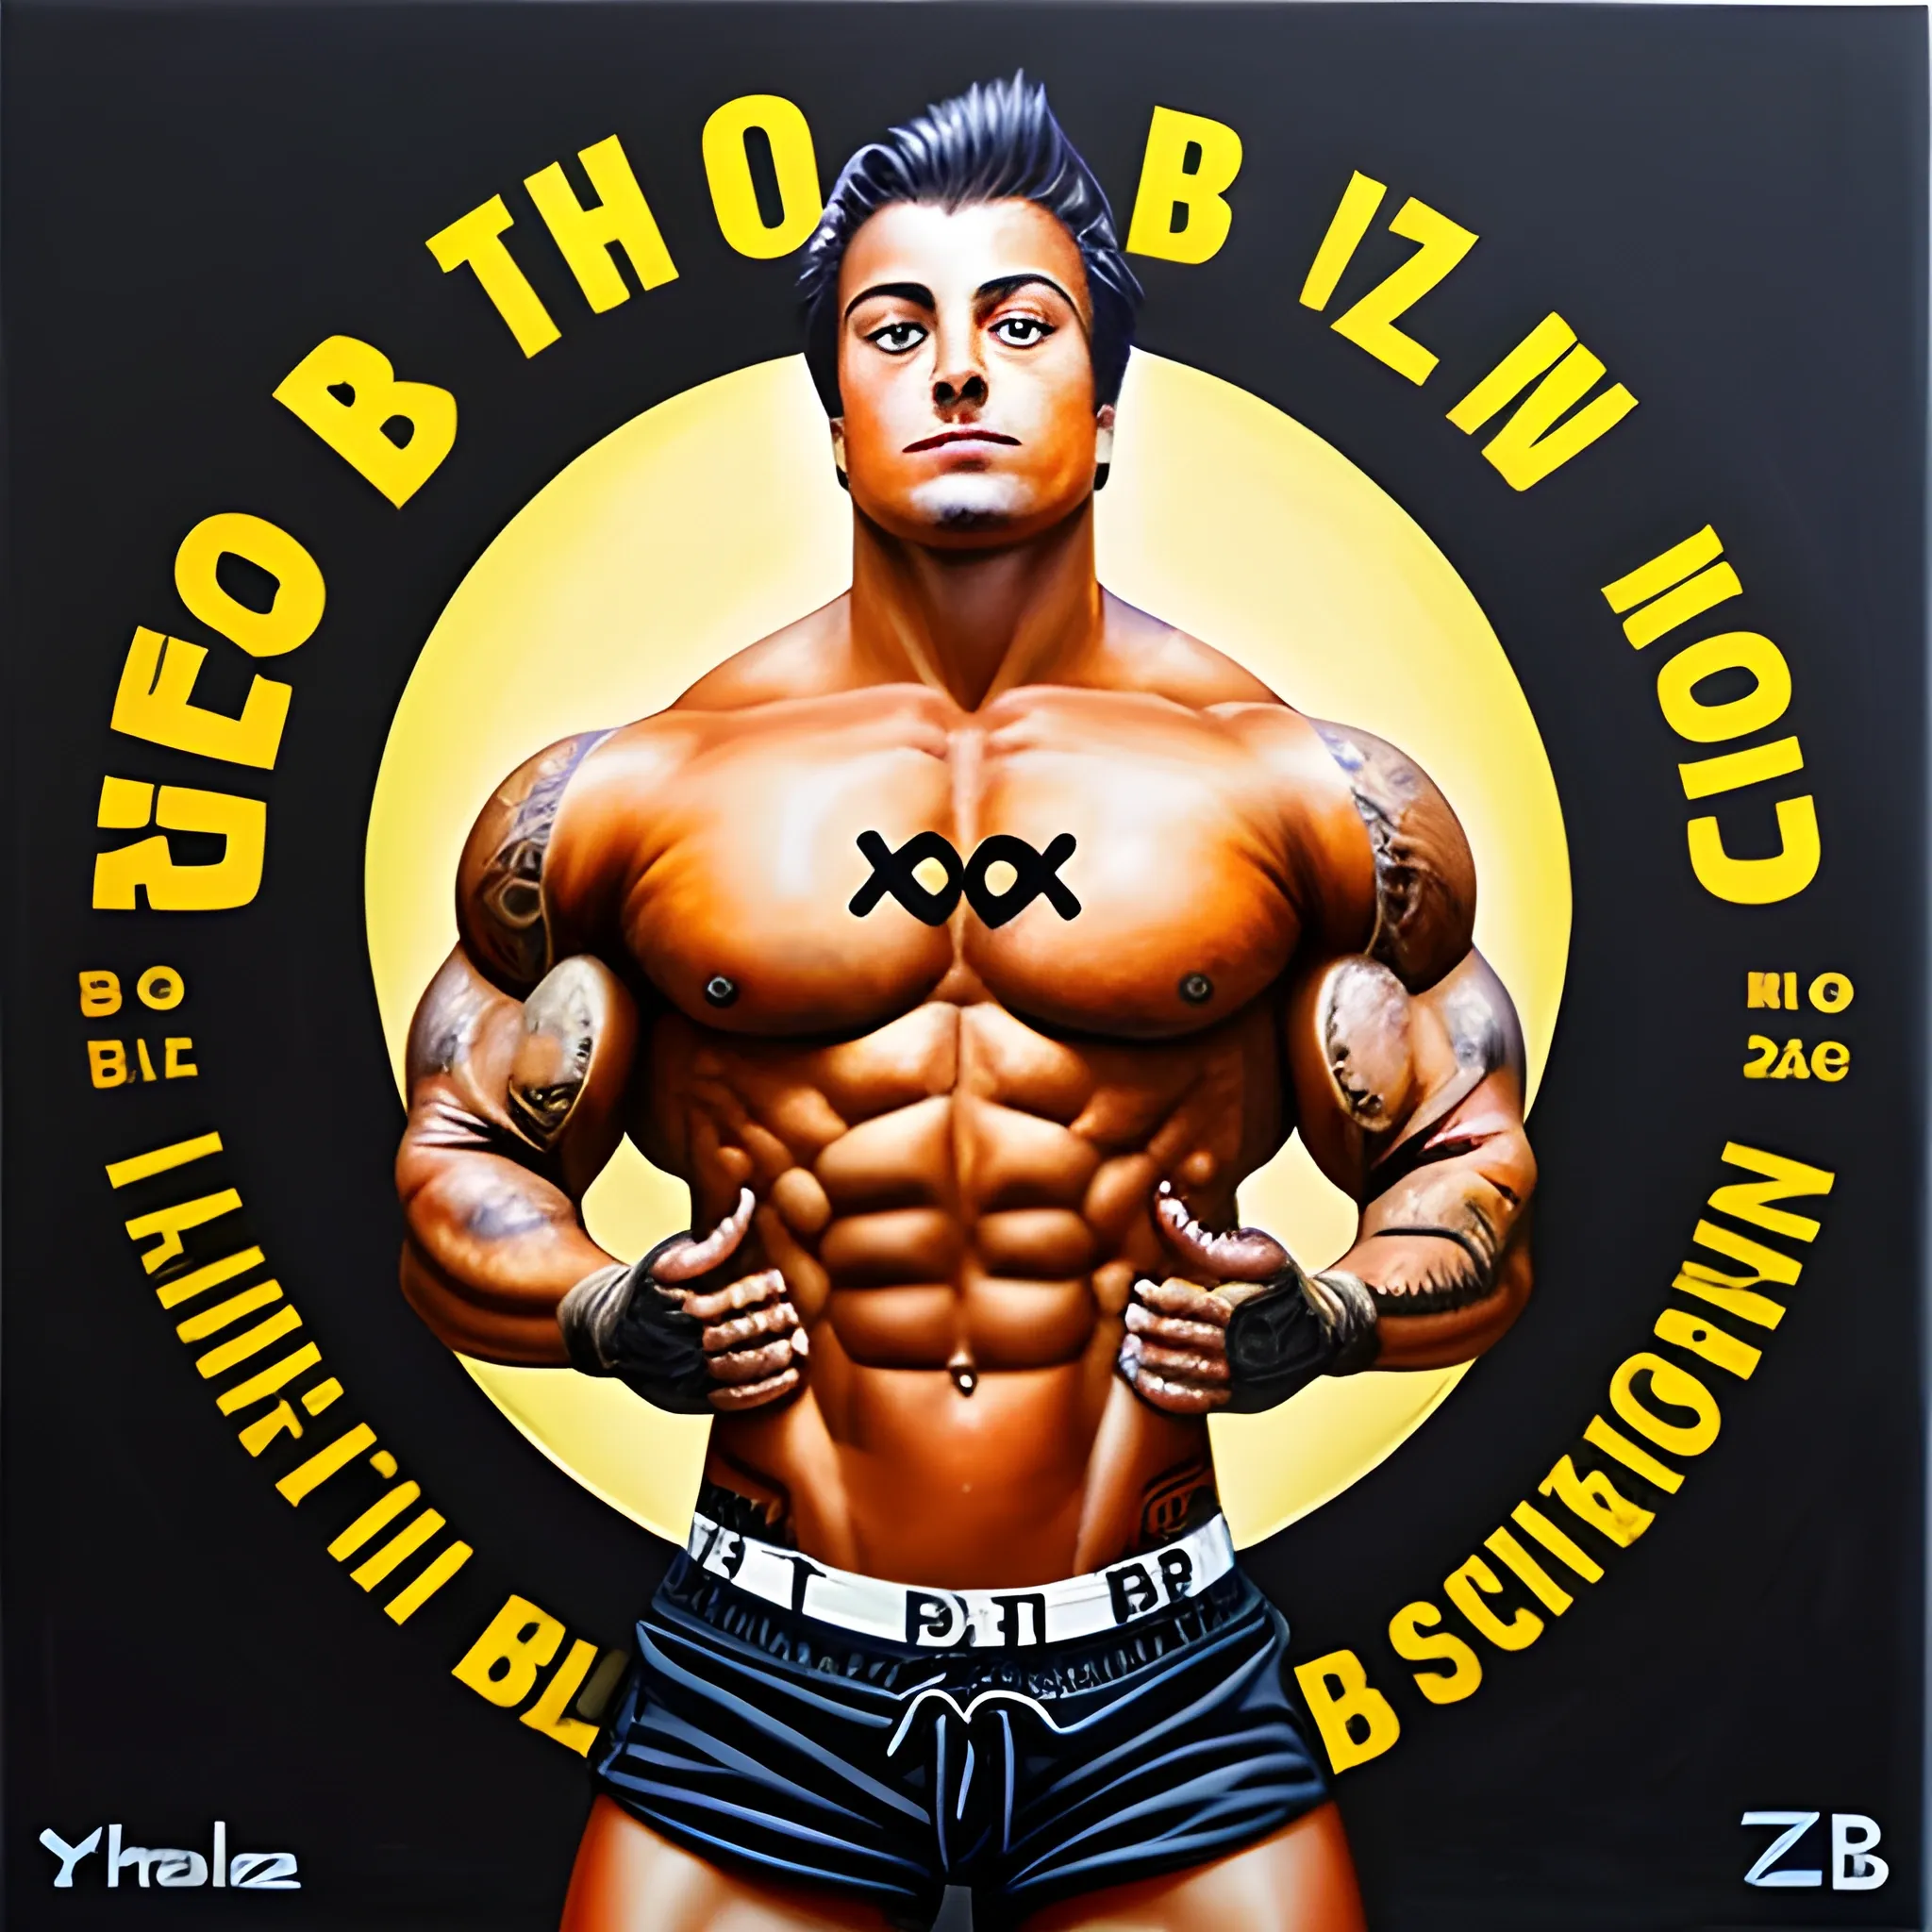 Zyzz Pose with "BB" over it, a branding logo
Bodybuilding, in a circle, Oil Painting